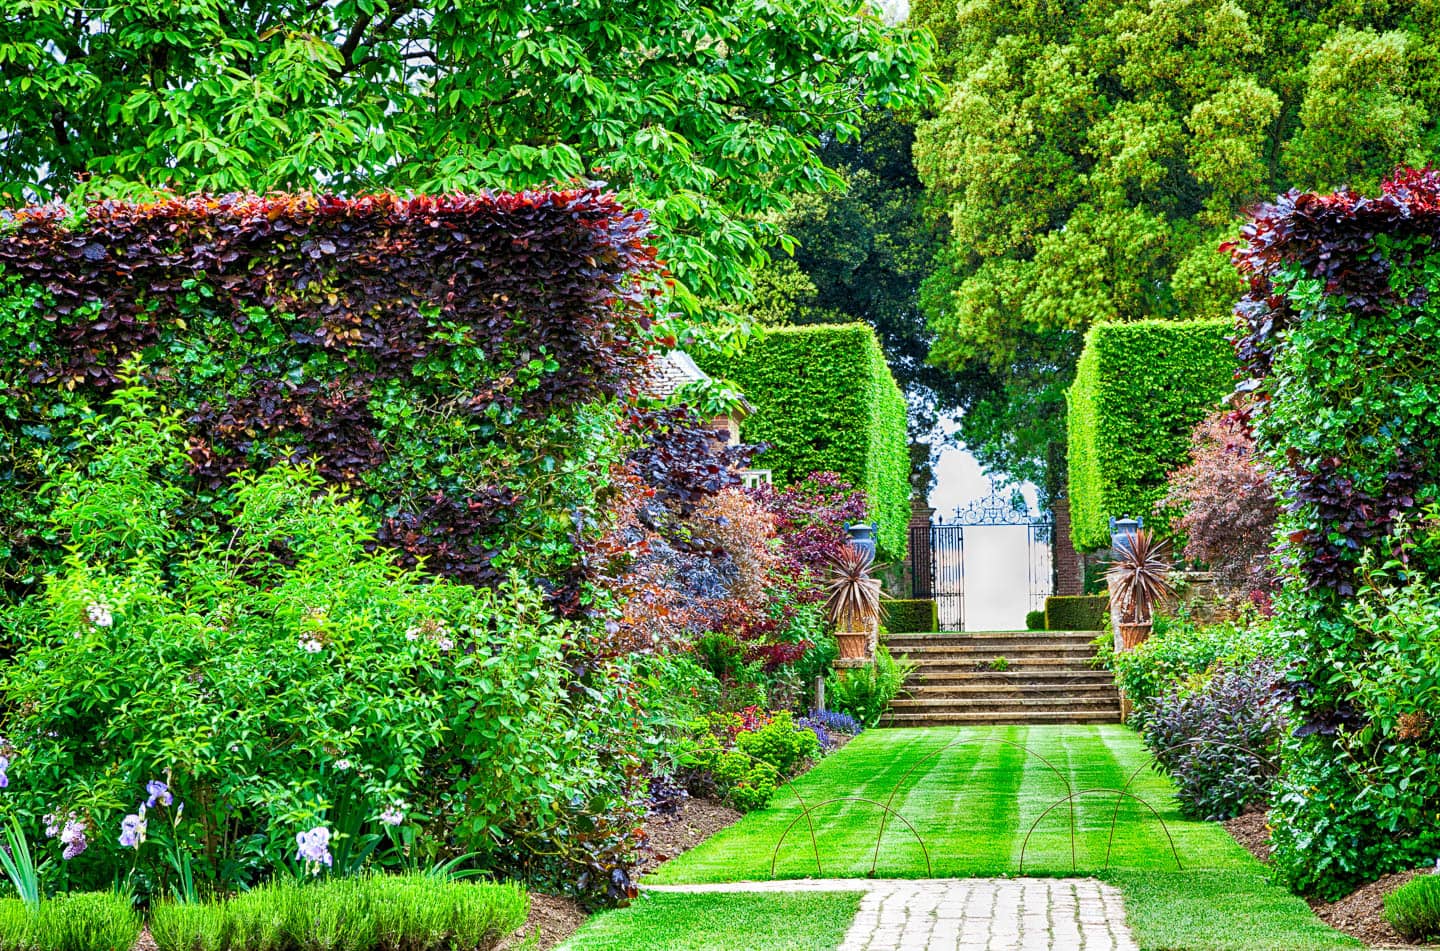 A formal garden design with a grass path and a clipped hedge